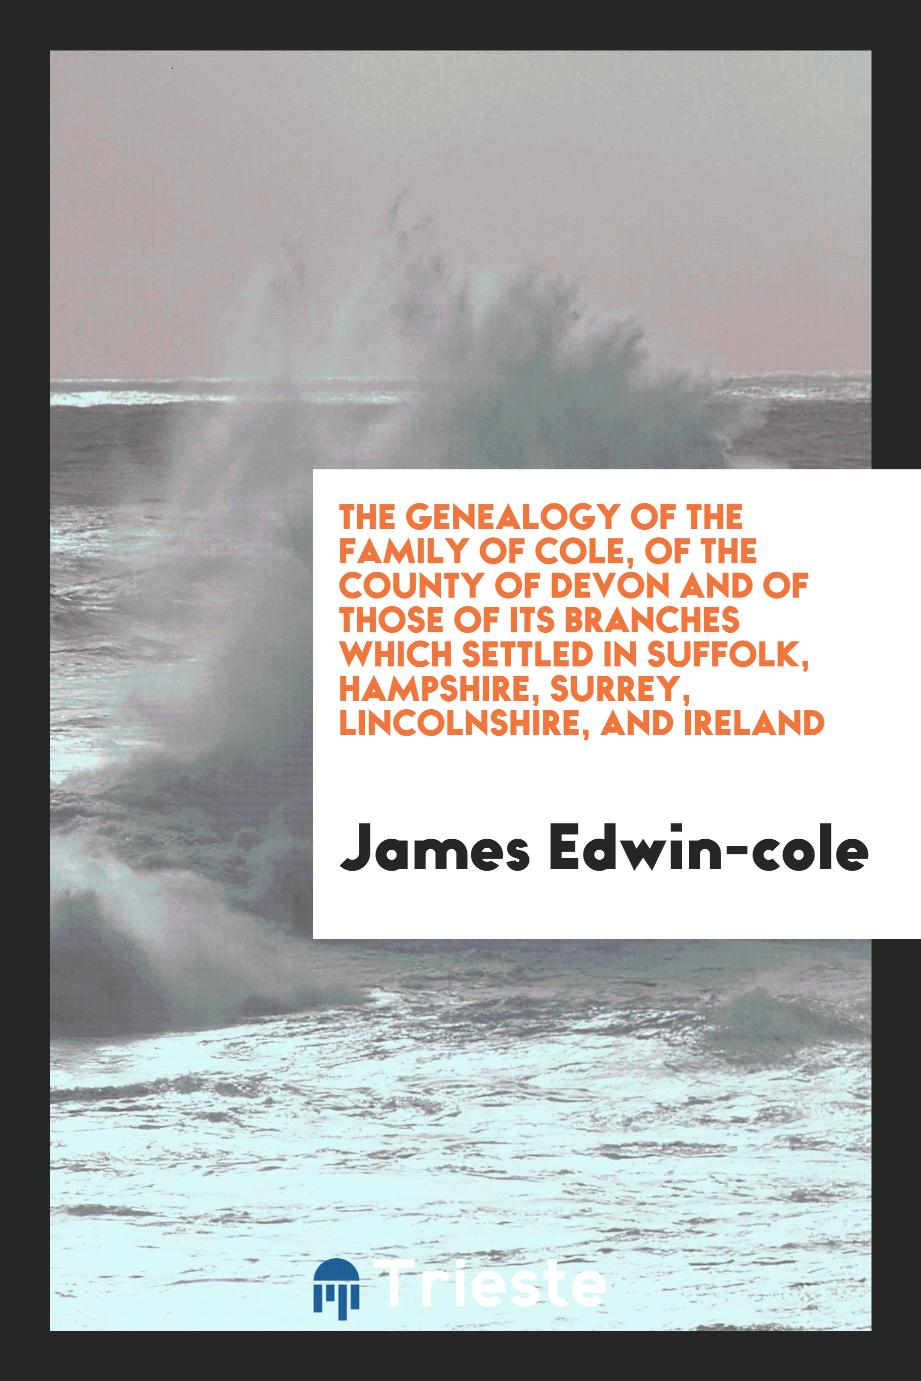 The Genealogy of the Family of Cole, of the County of Devon and of those of its branches which settled in suffolk, hampshire, surrey, lincolnshire, and ireland